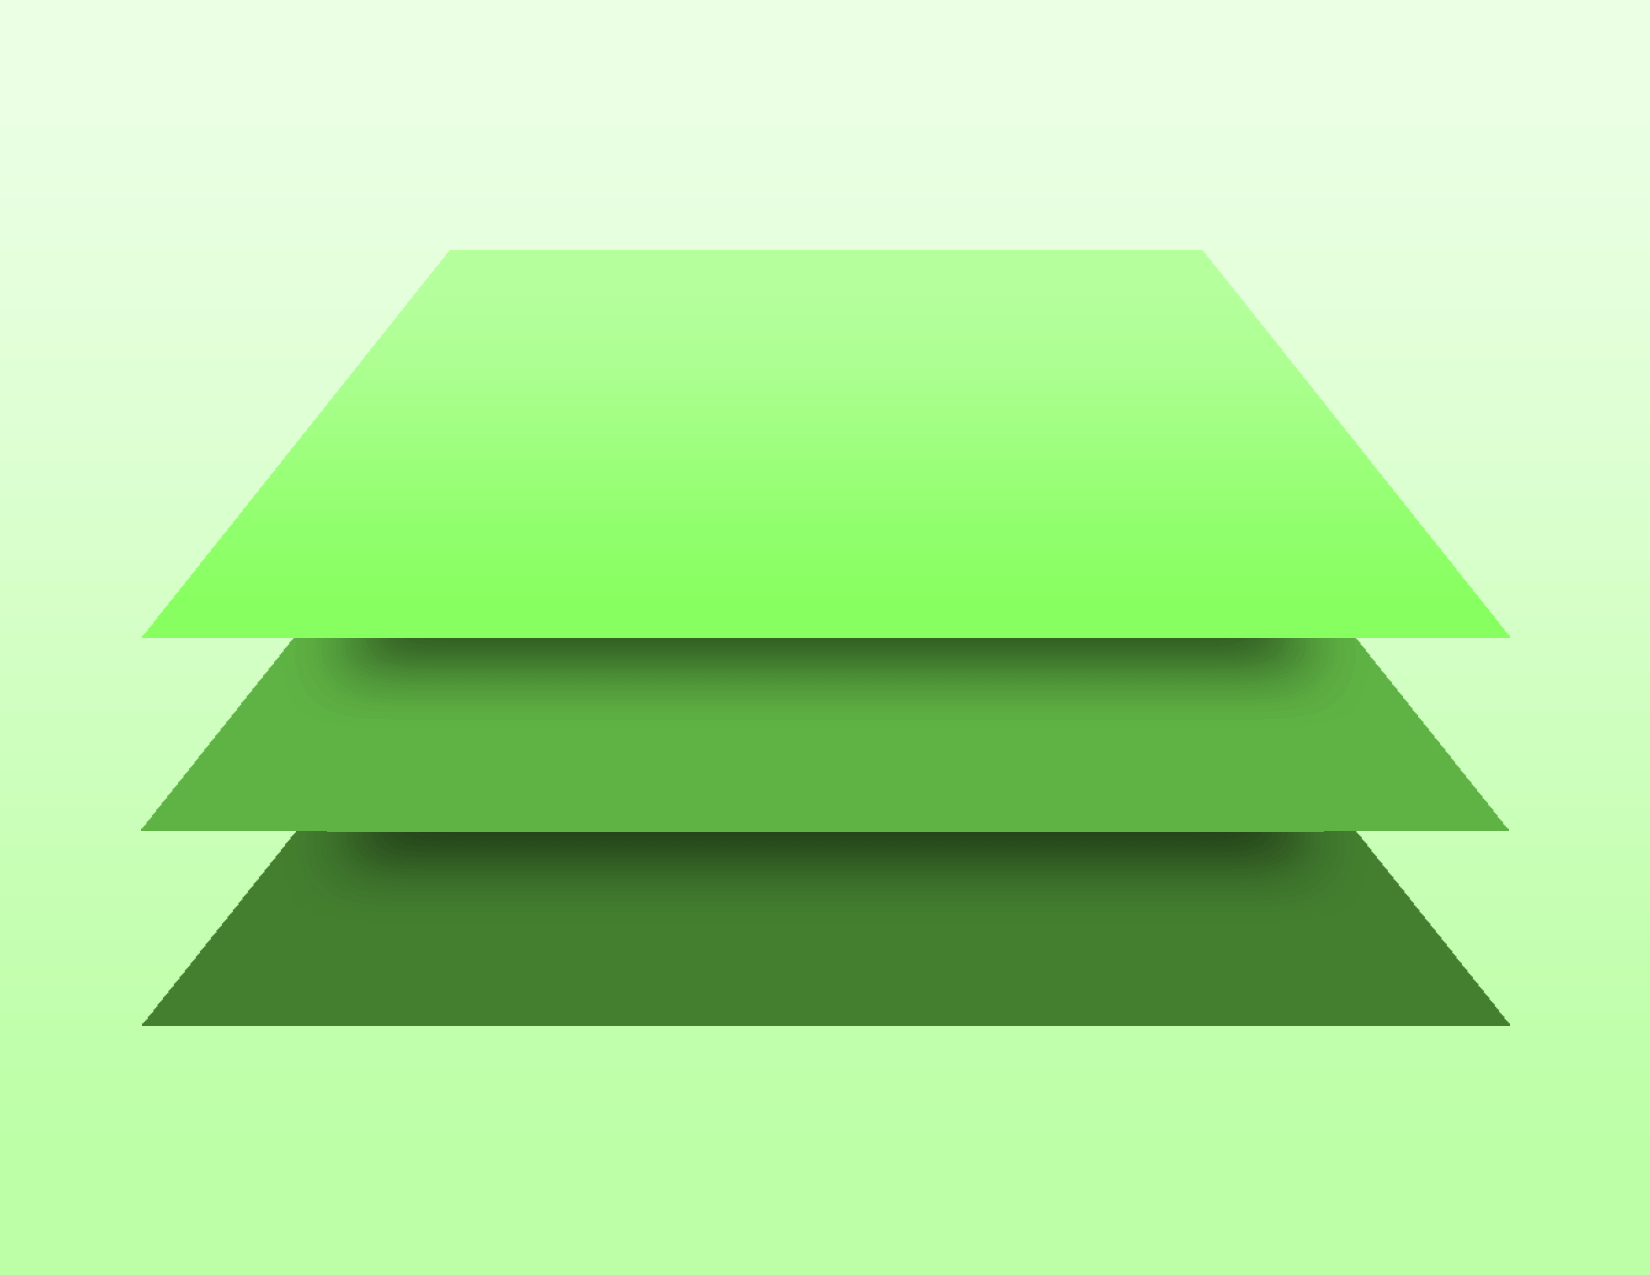 Image of layers stacked with shadows to represent Material Design ideals.